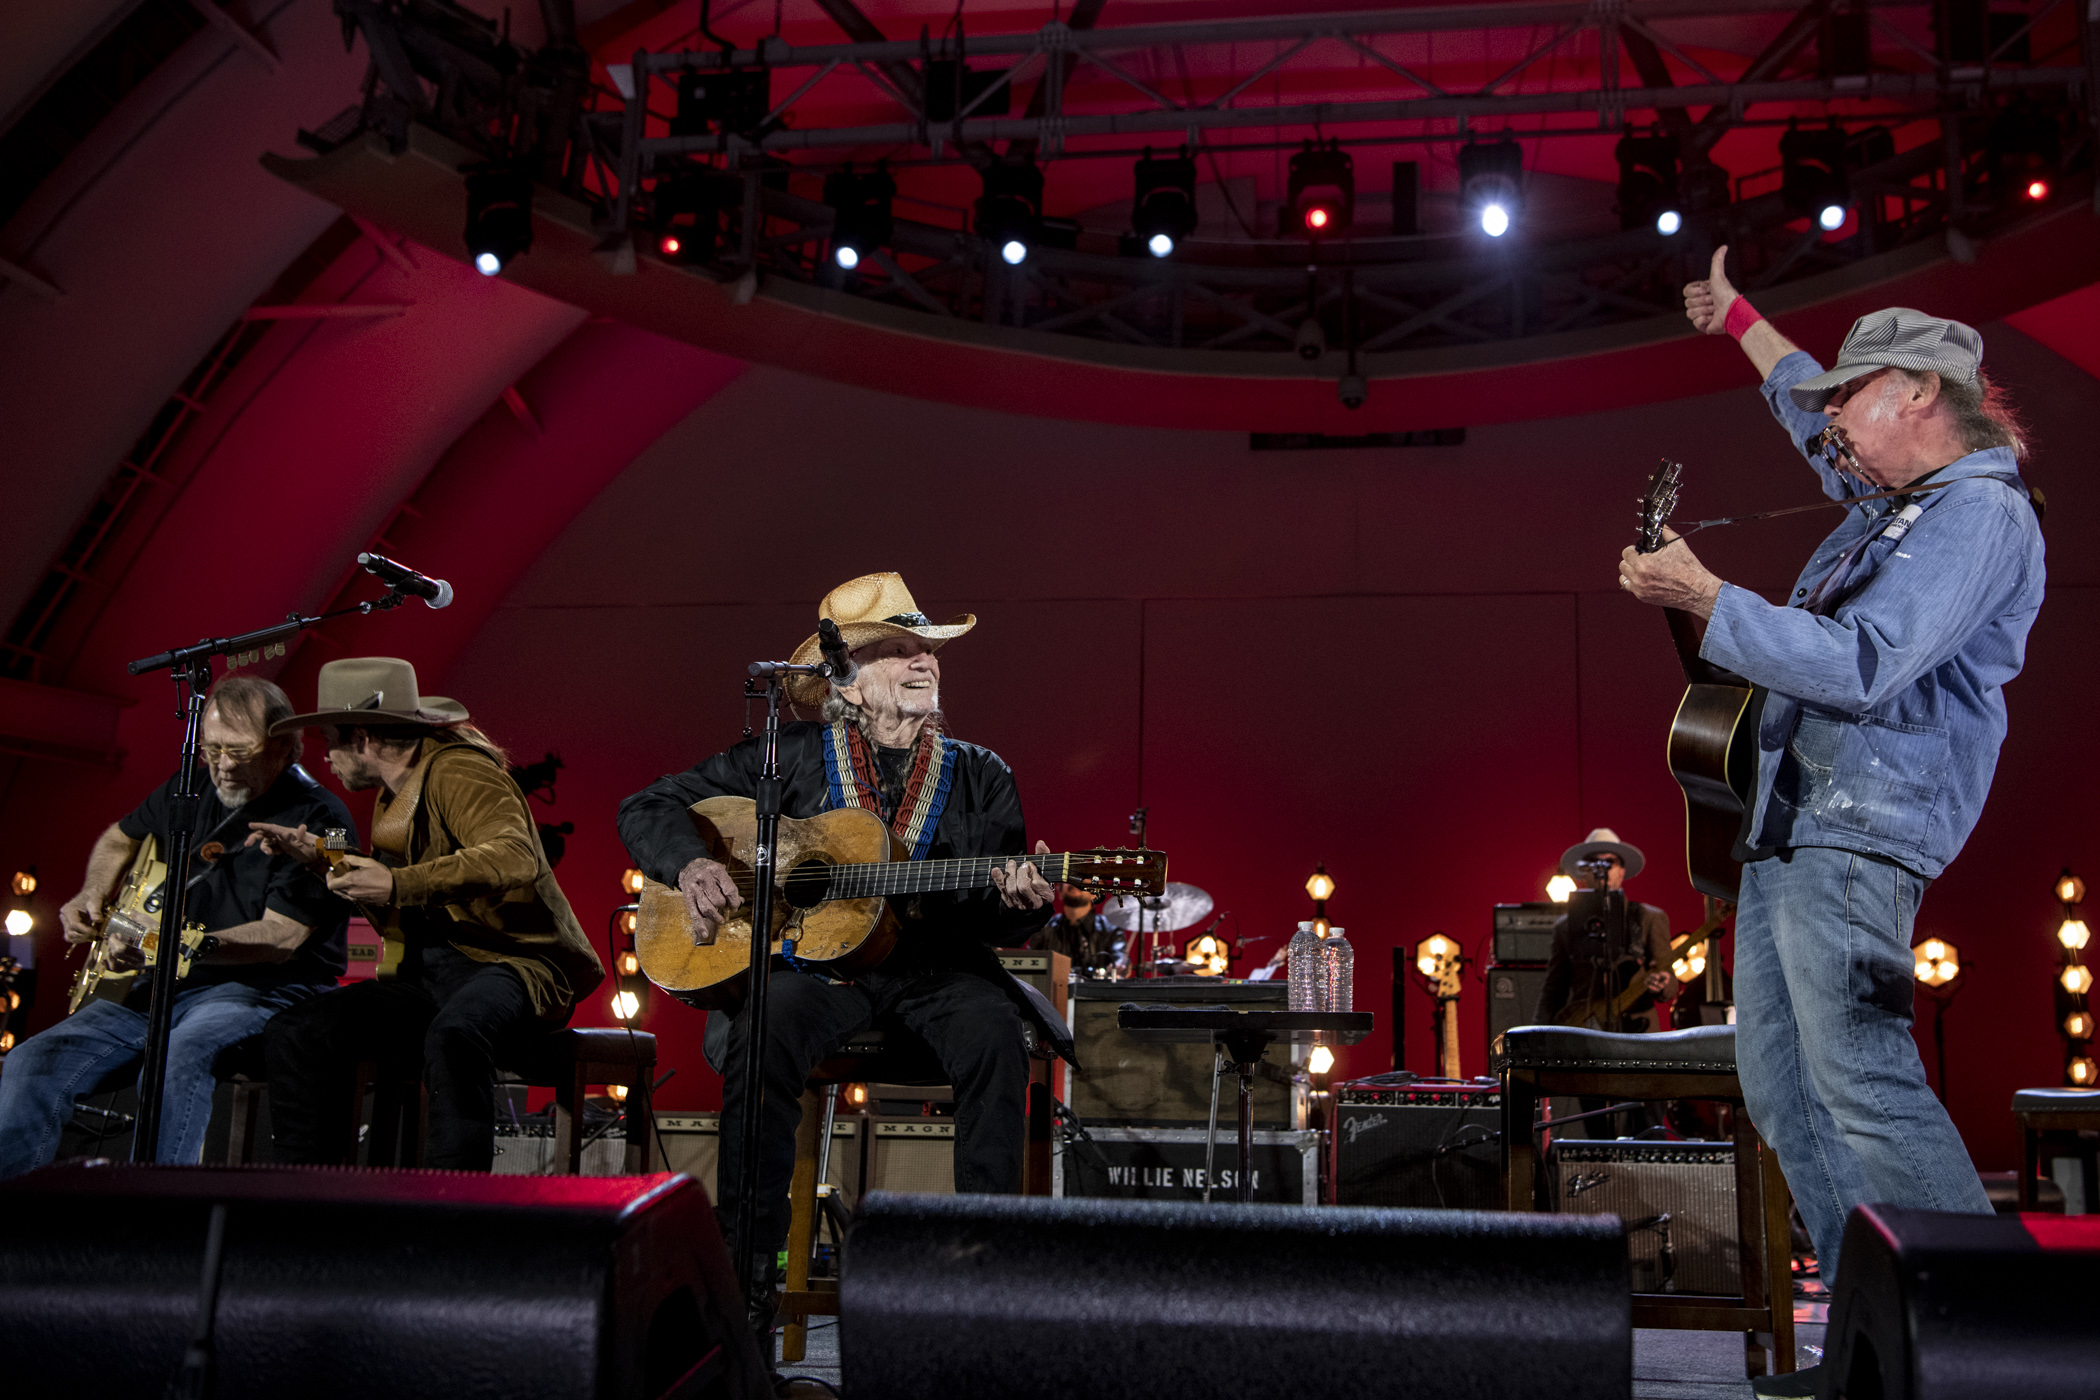 Austin’s Favorite Outlaw- Willie Nelson’s 90th Bash Was Epic